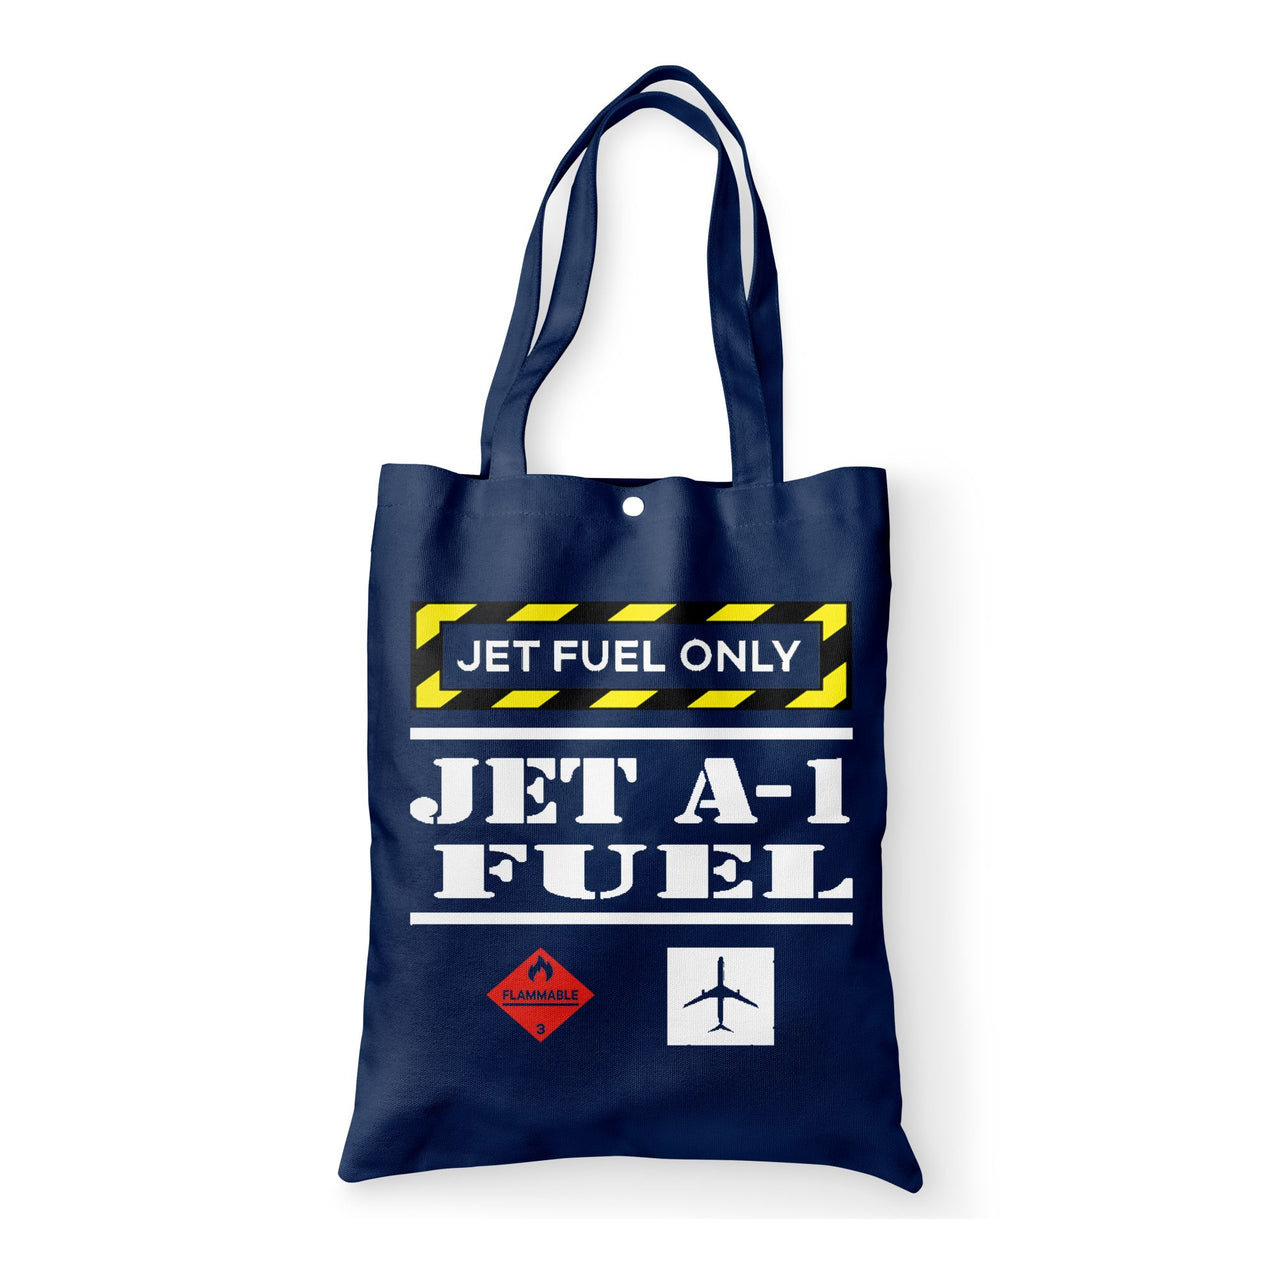 Jet Fuel Only Designed Tote Bags